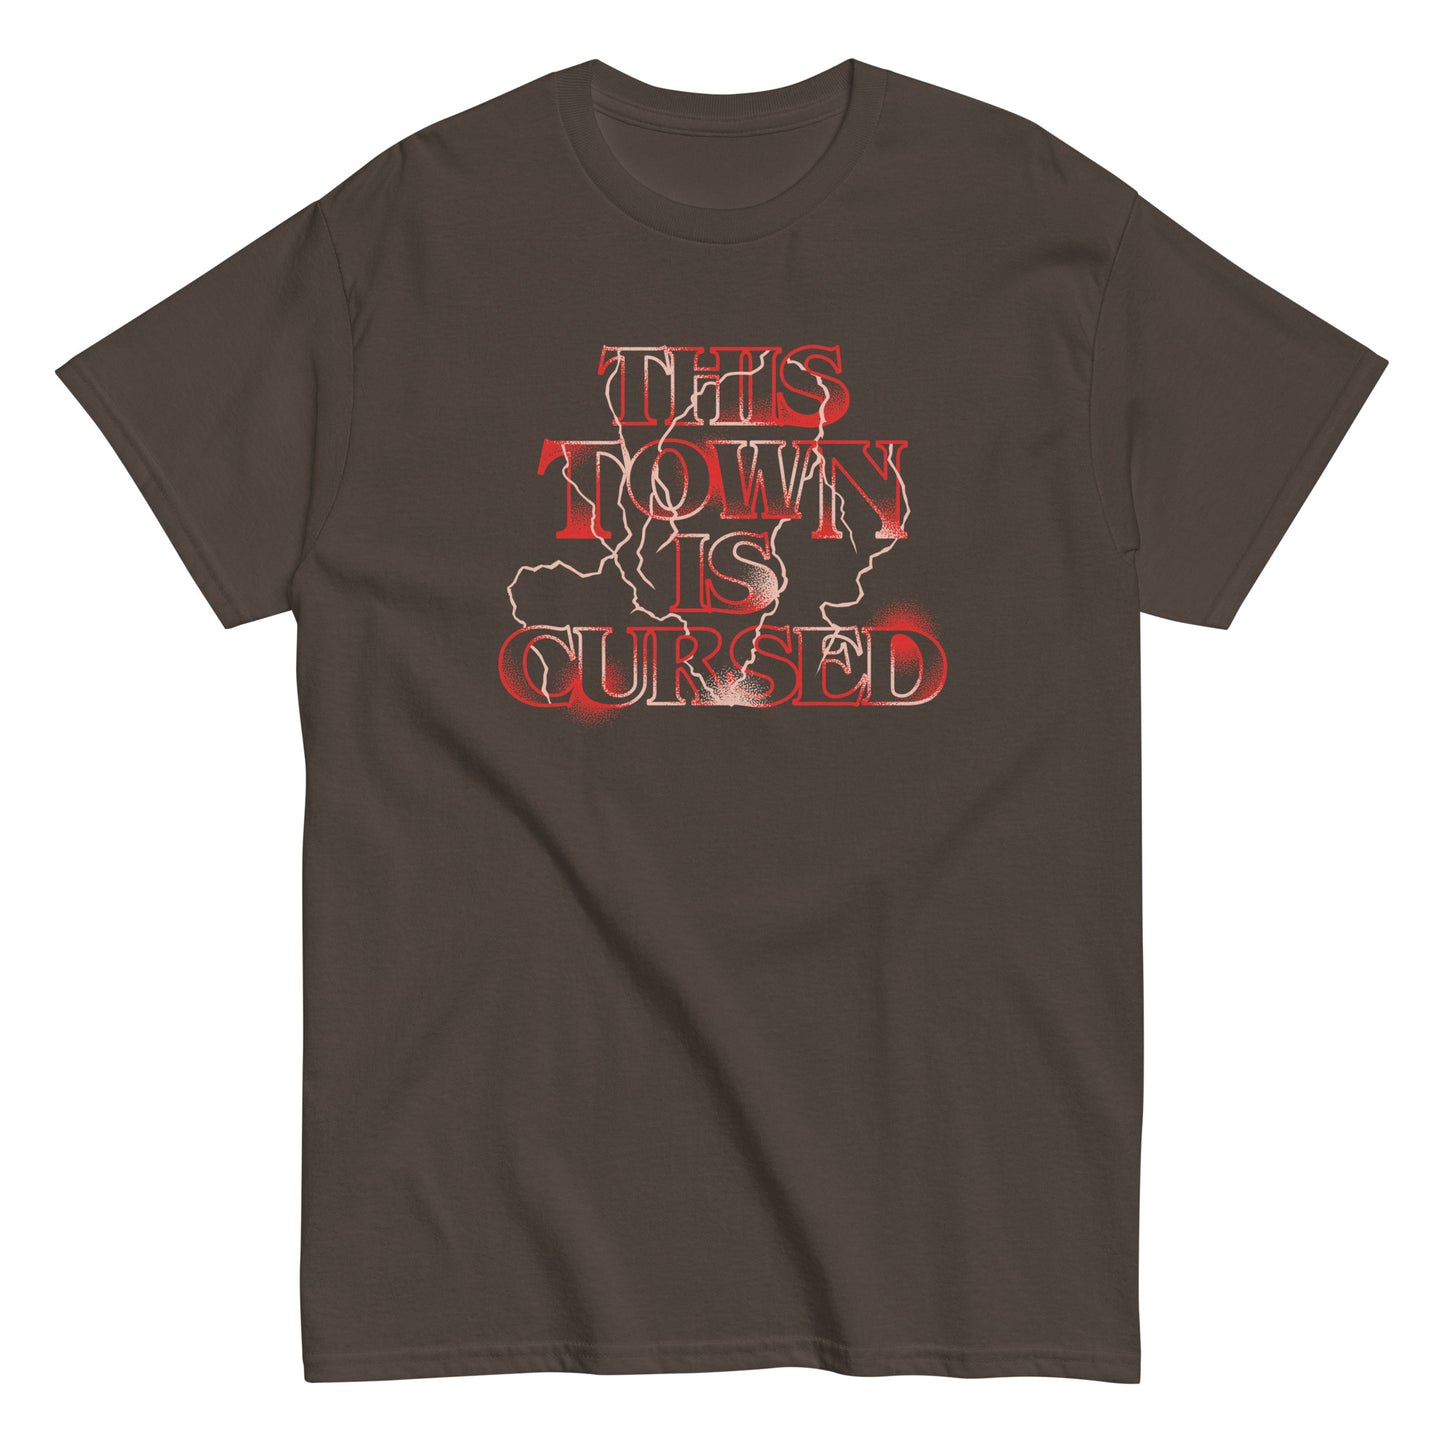 This Town Is Cursed Men's Classic Tee